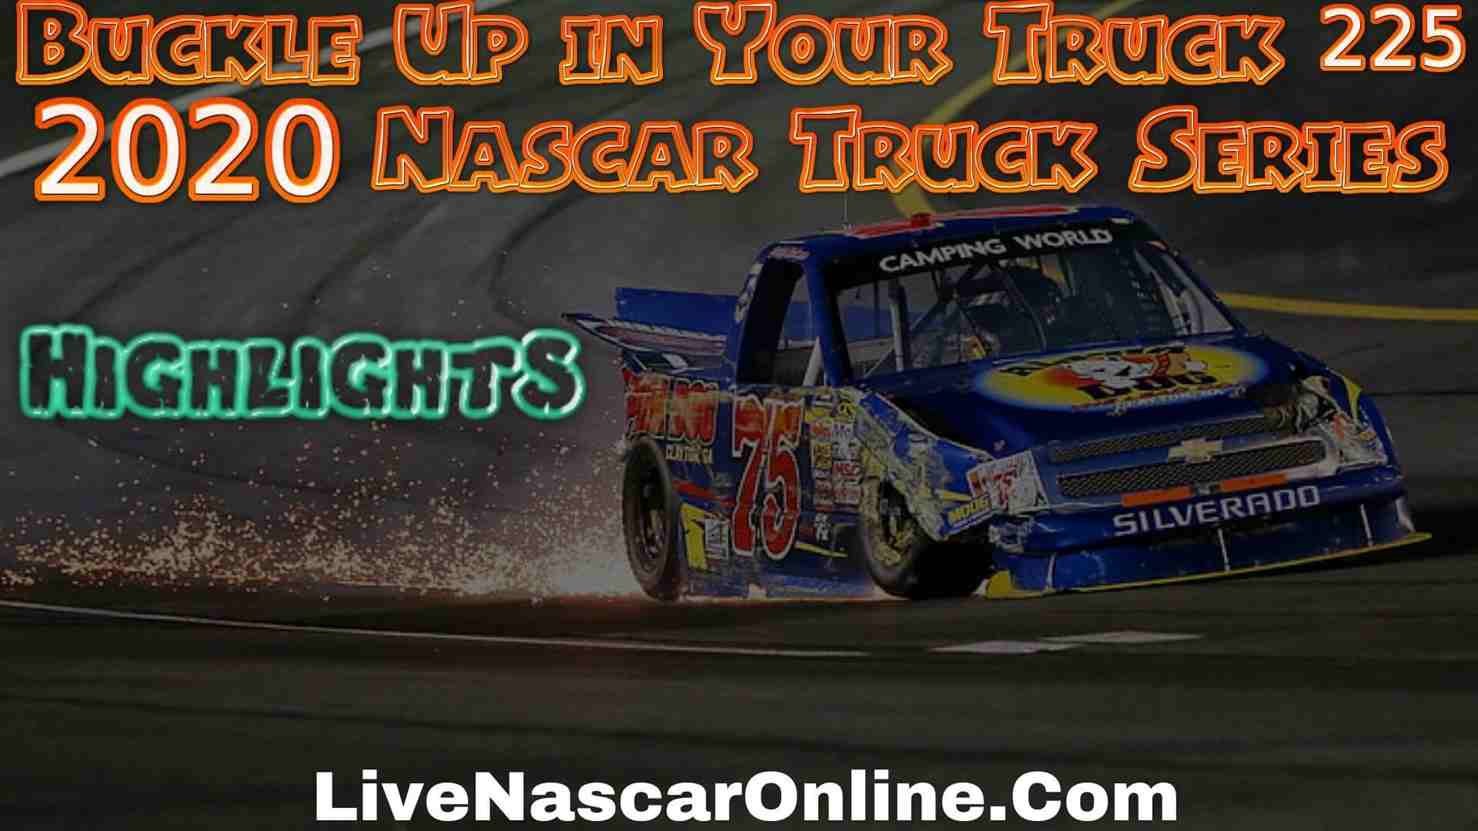 Nascar Buckle Up in Your Truck 225 Highlights 2020